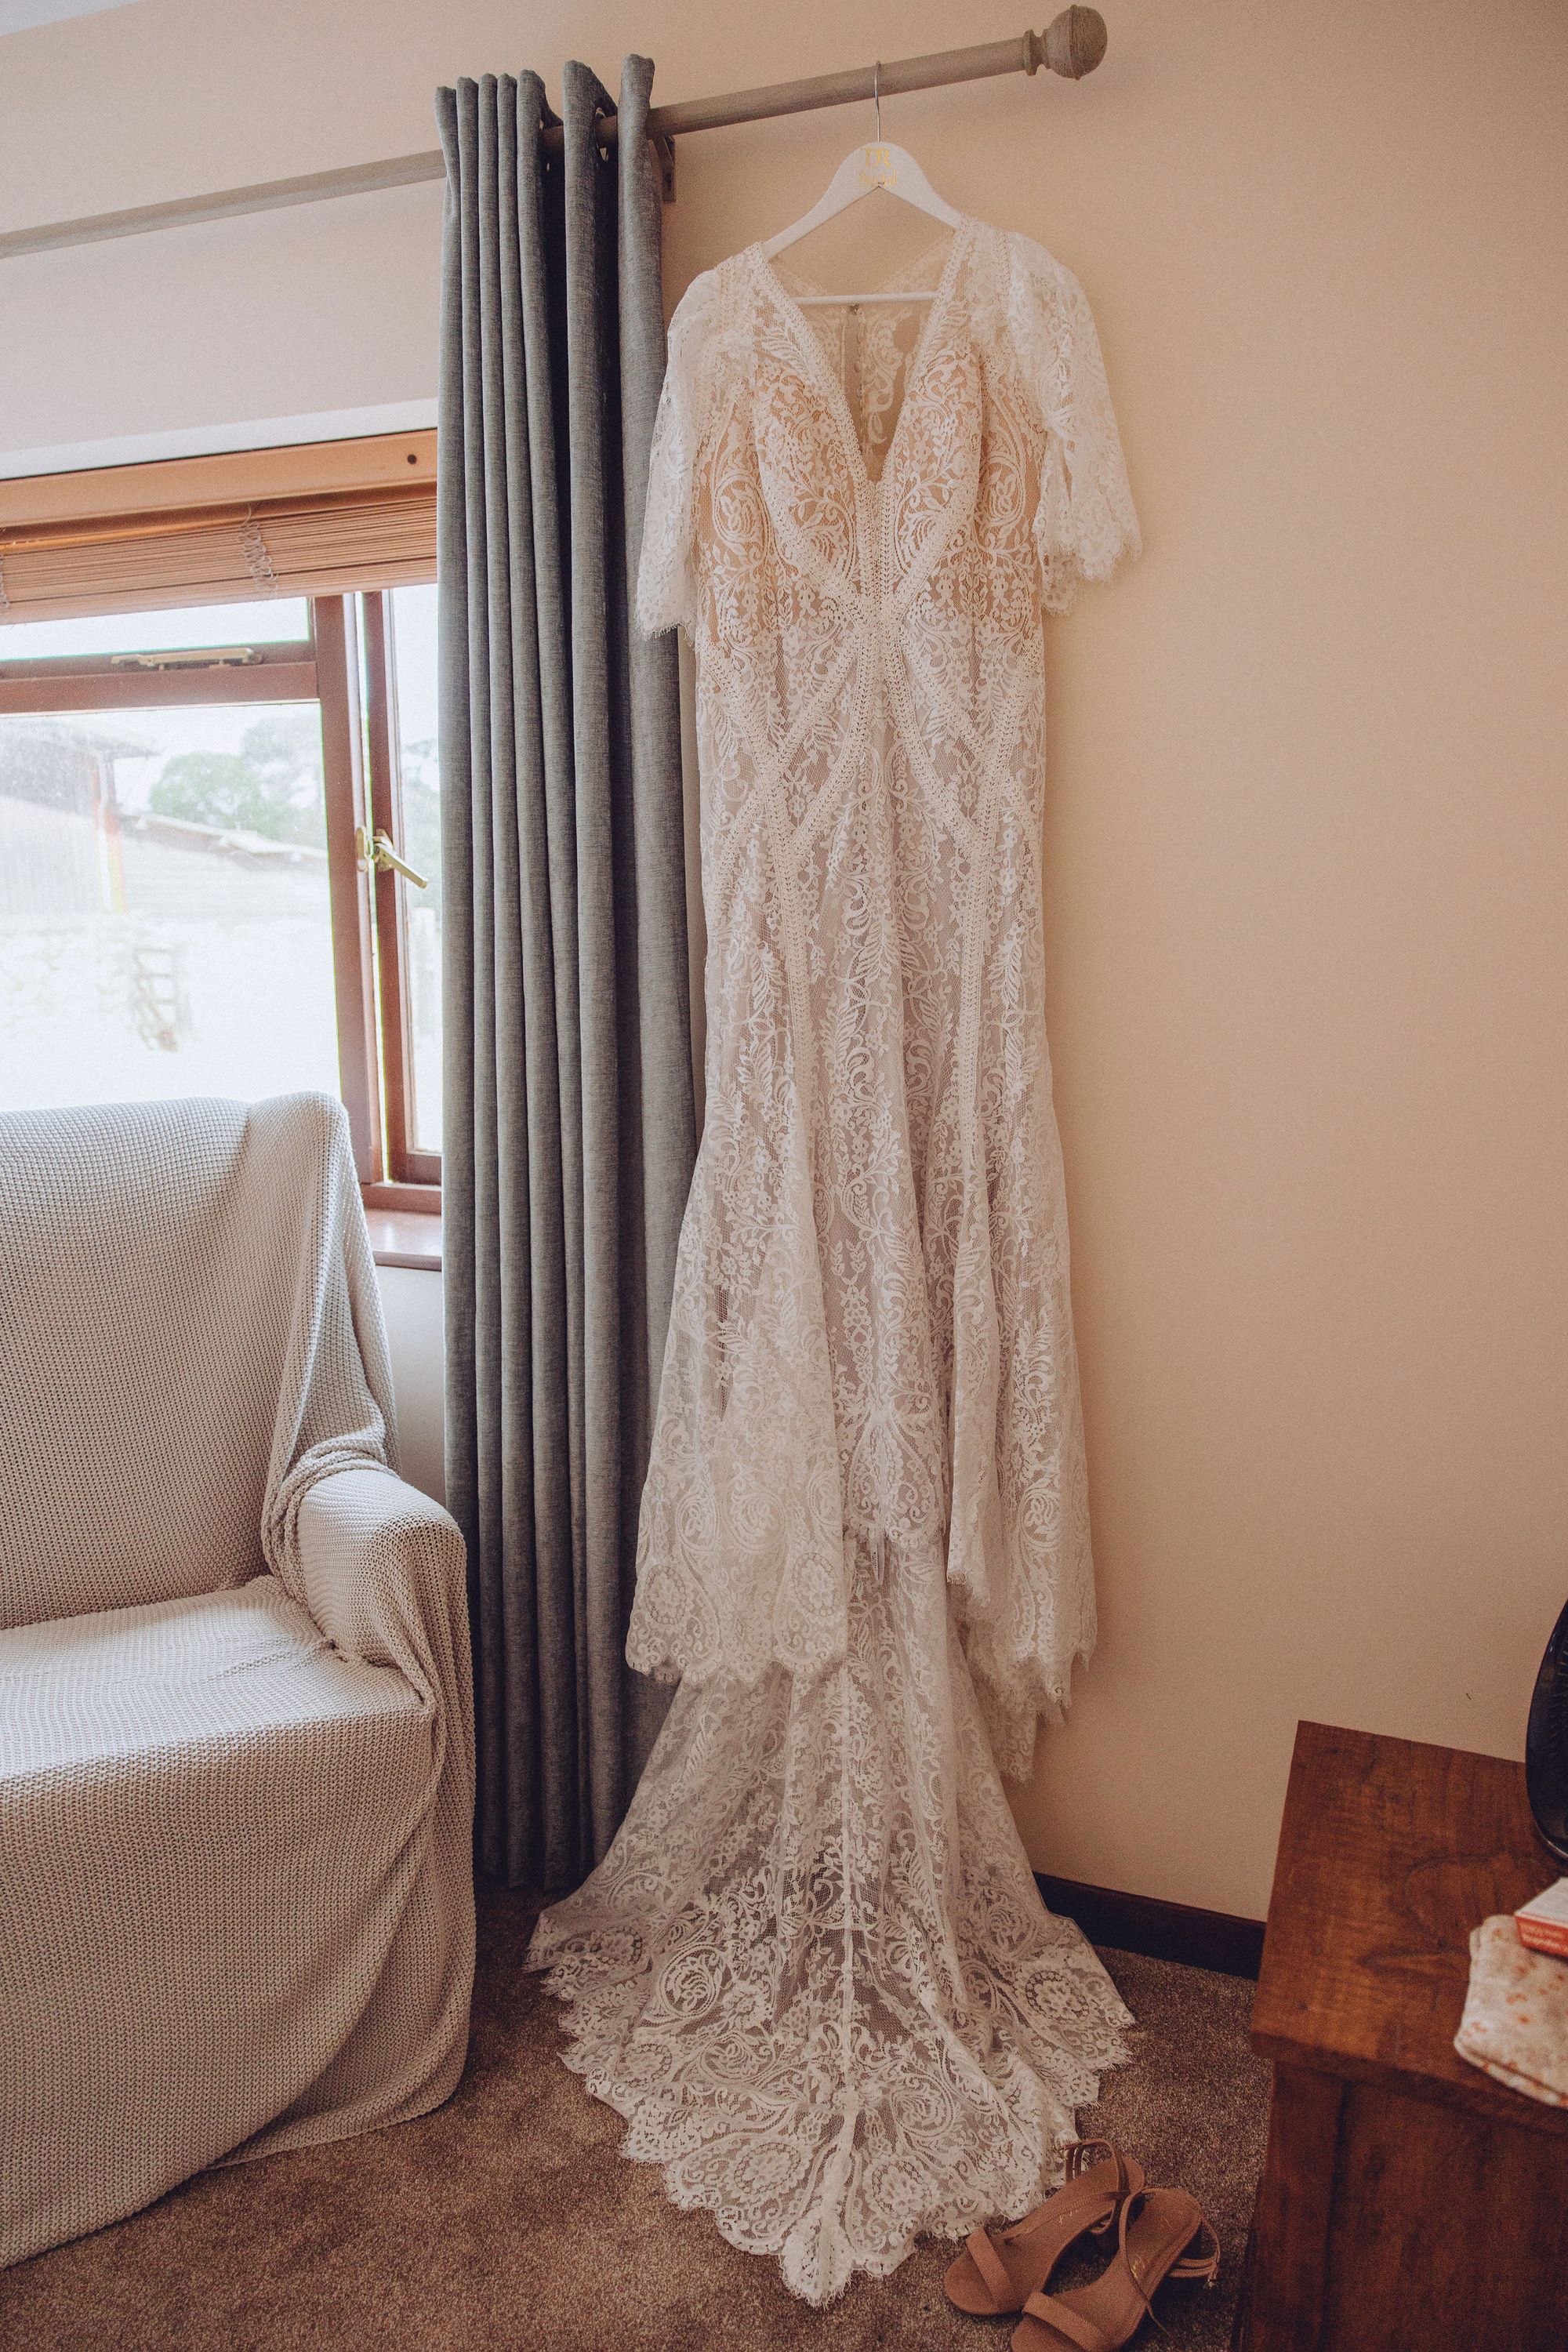 Gorgeous lace wedding dress with half sleeves hanging from the curtain rail. Photo thanks to Fordtography.